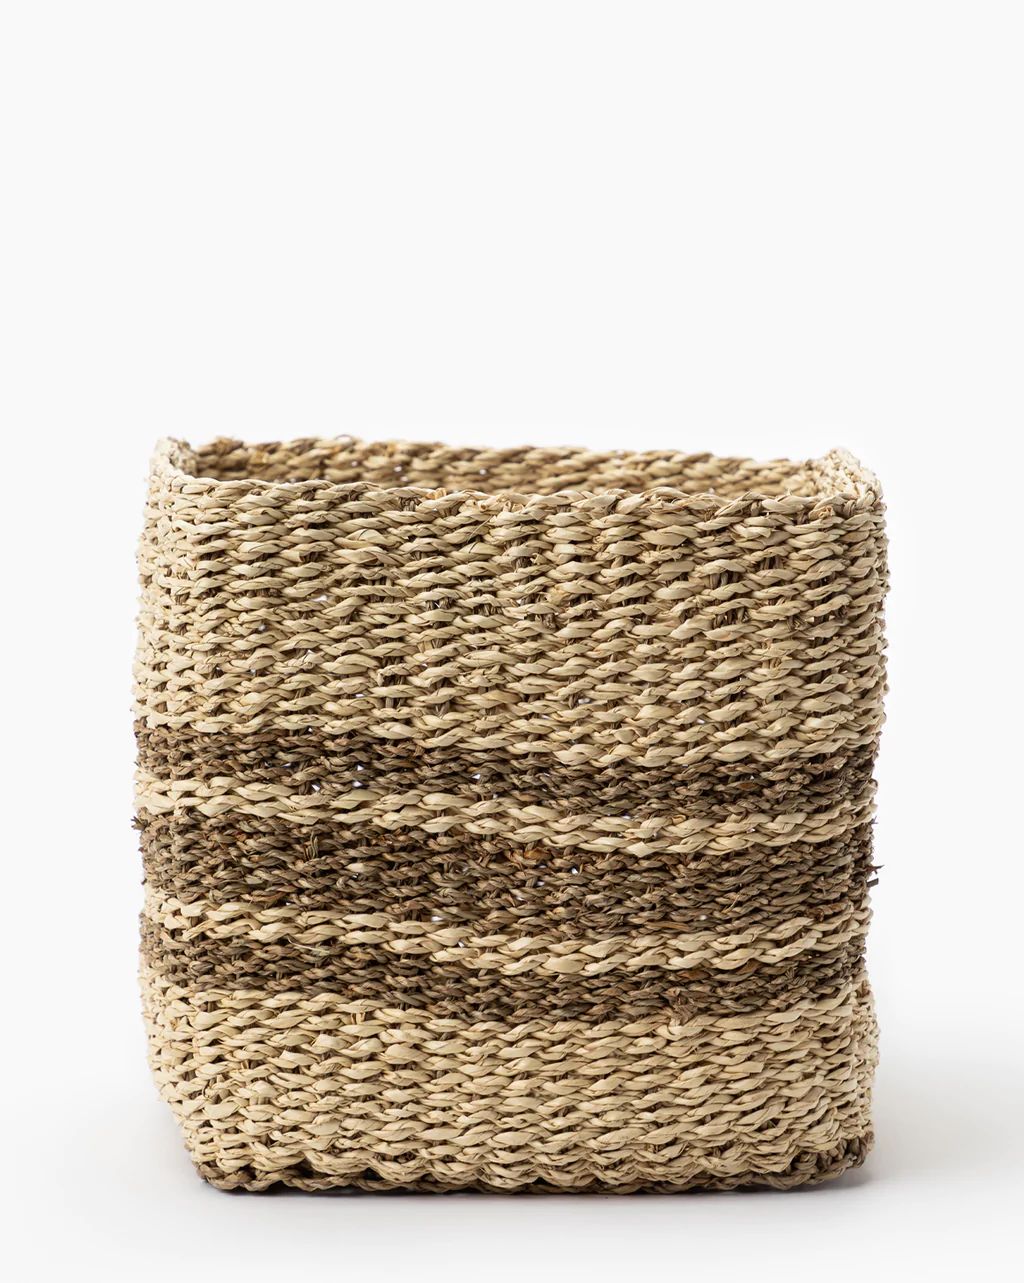 Conway Basket | McGee & Co.